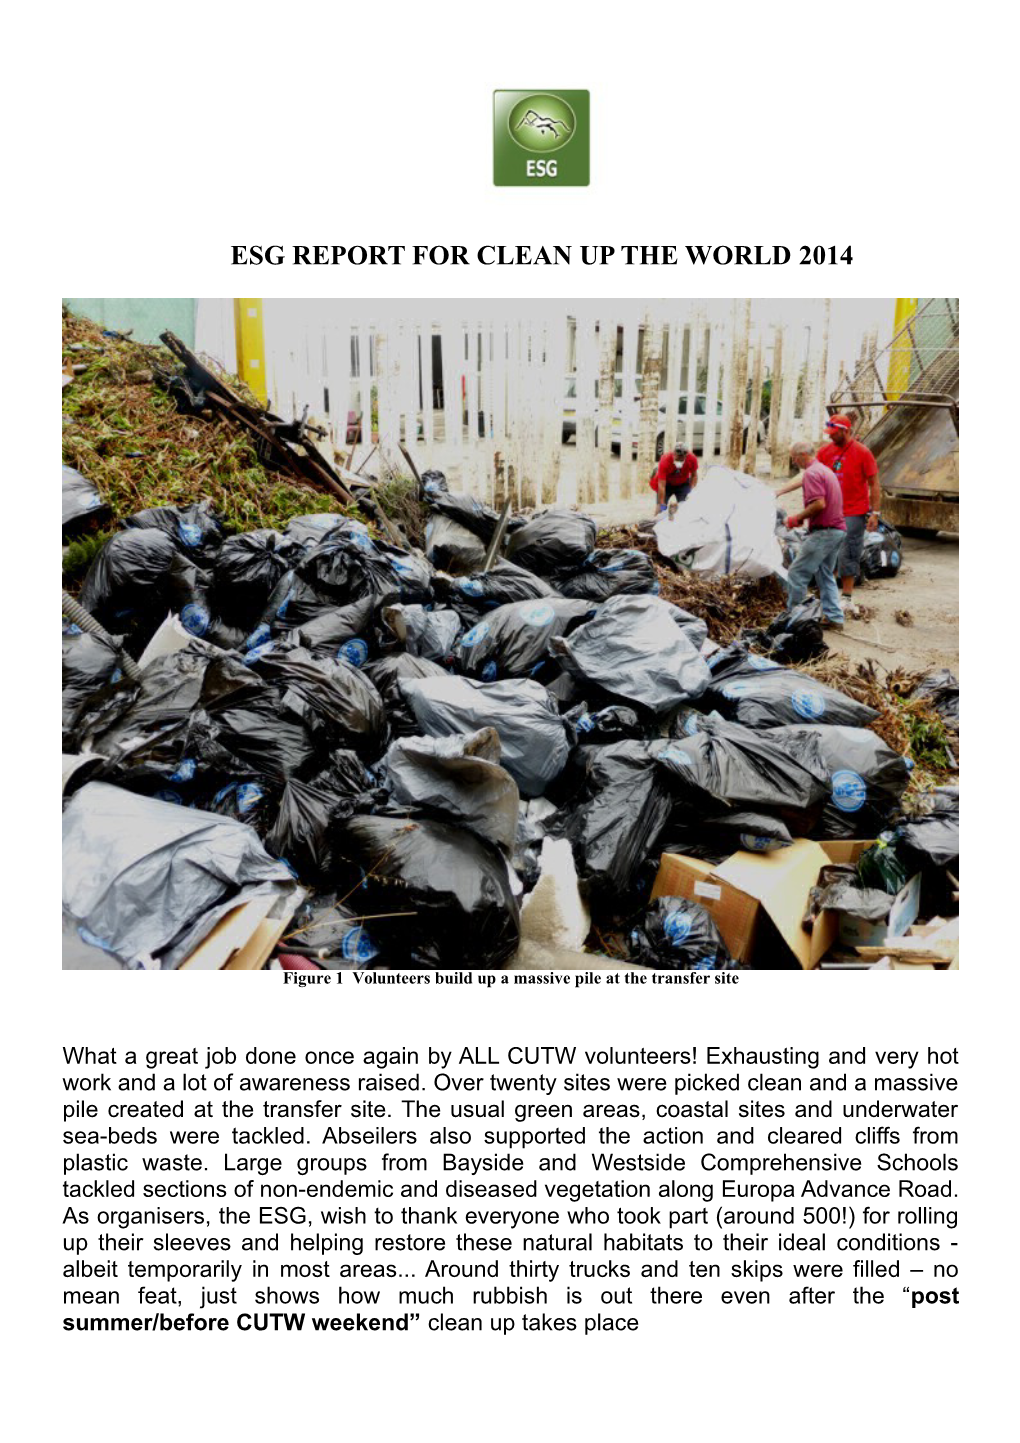 Esg Report for Clean up the World 2014